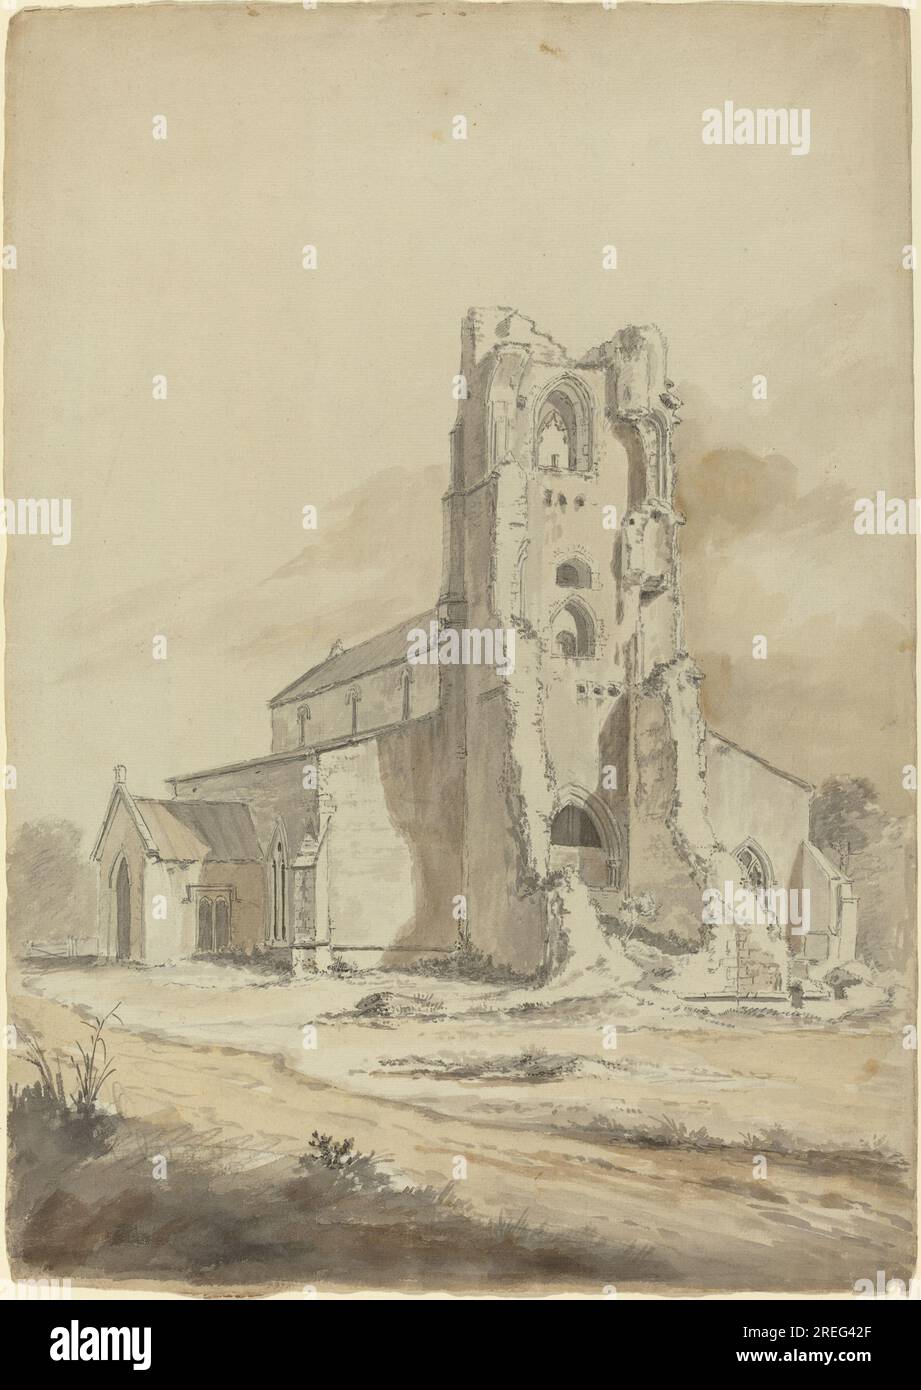 'Hendrik Frans de Cort, Ruined Church, probably 1794, graphite with gray and brown wash on laid paper, overall (approximate): 49.2 x 33.7 cm (19 3/8 x 13 1/4 in.), Rosenwald Collection, 1951.16.177' Stock Photo